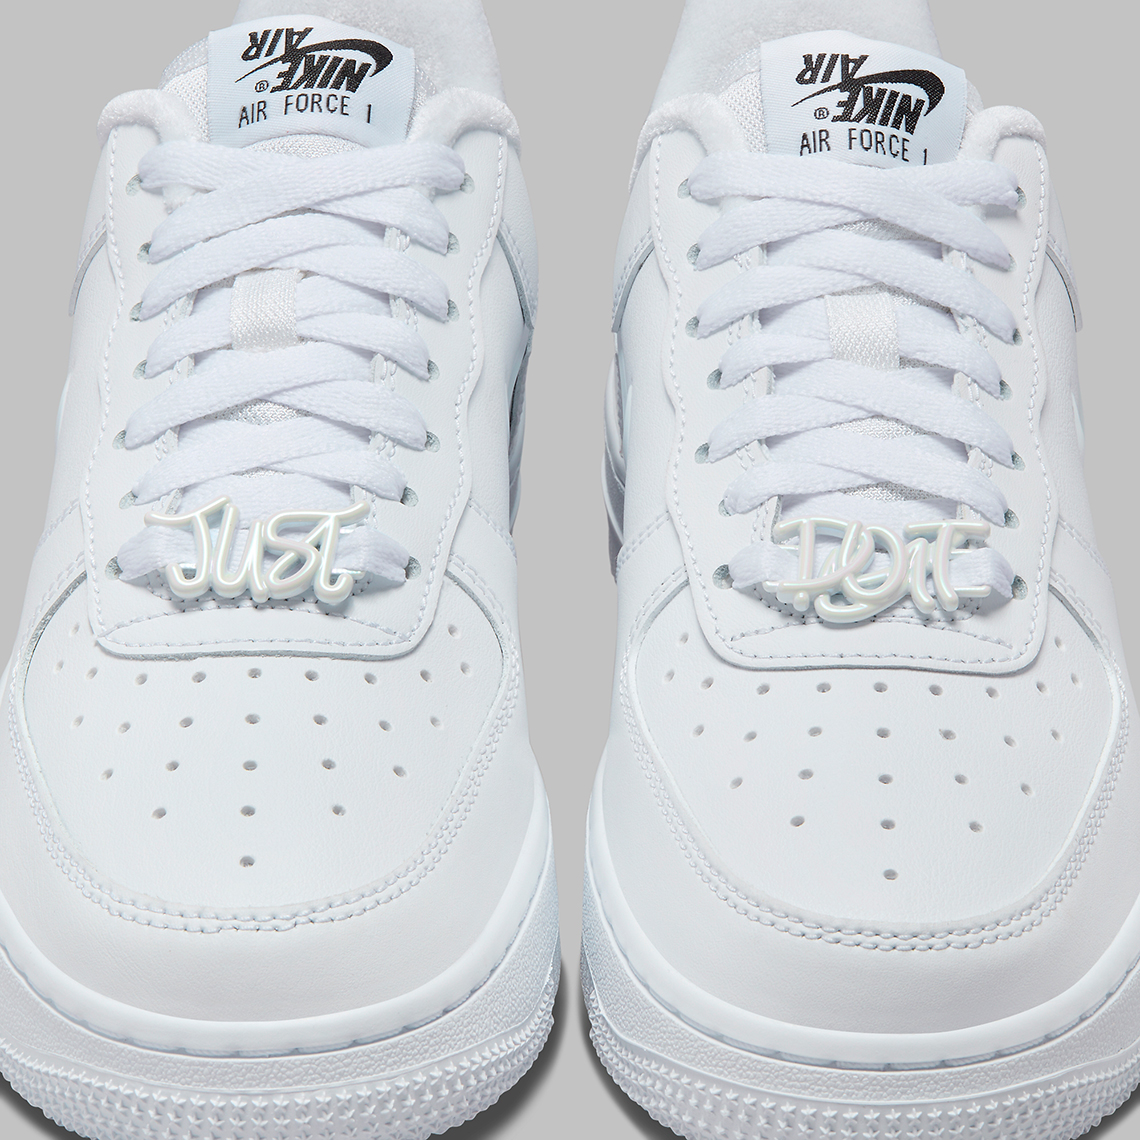 Nike Air Force 1 Low Womens Just Do It Fb8251 100 7